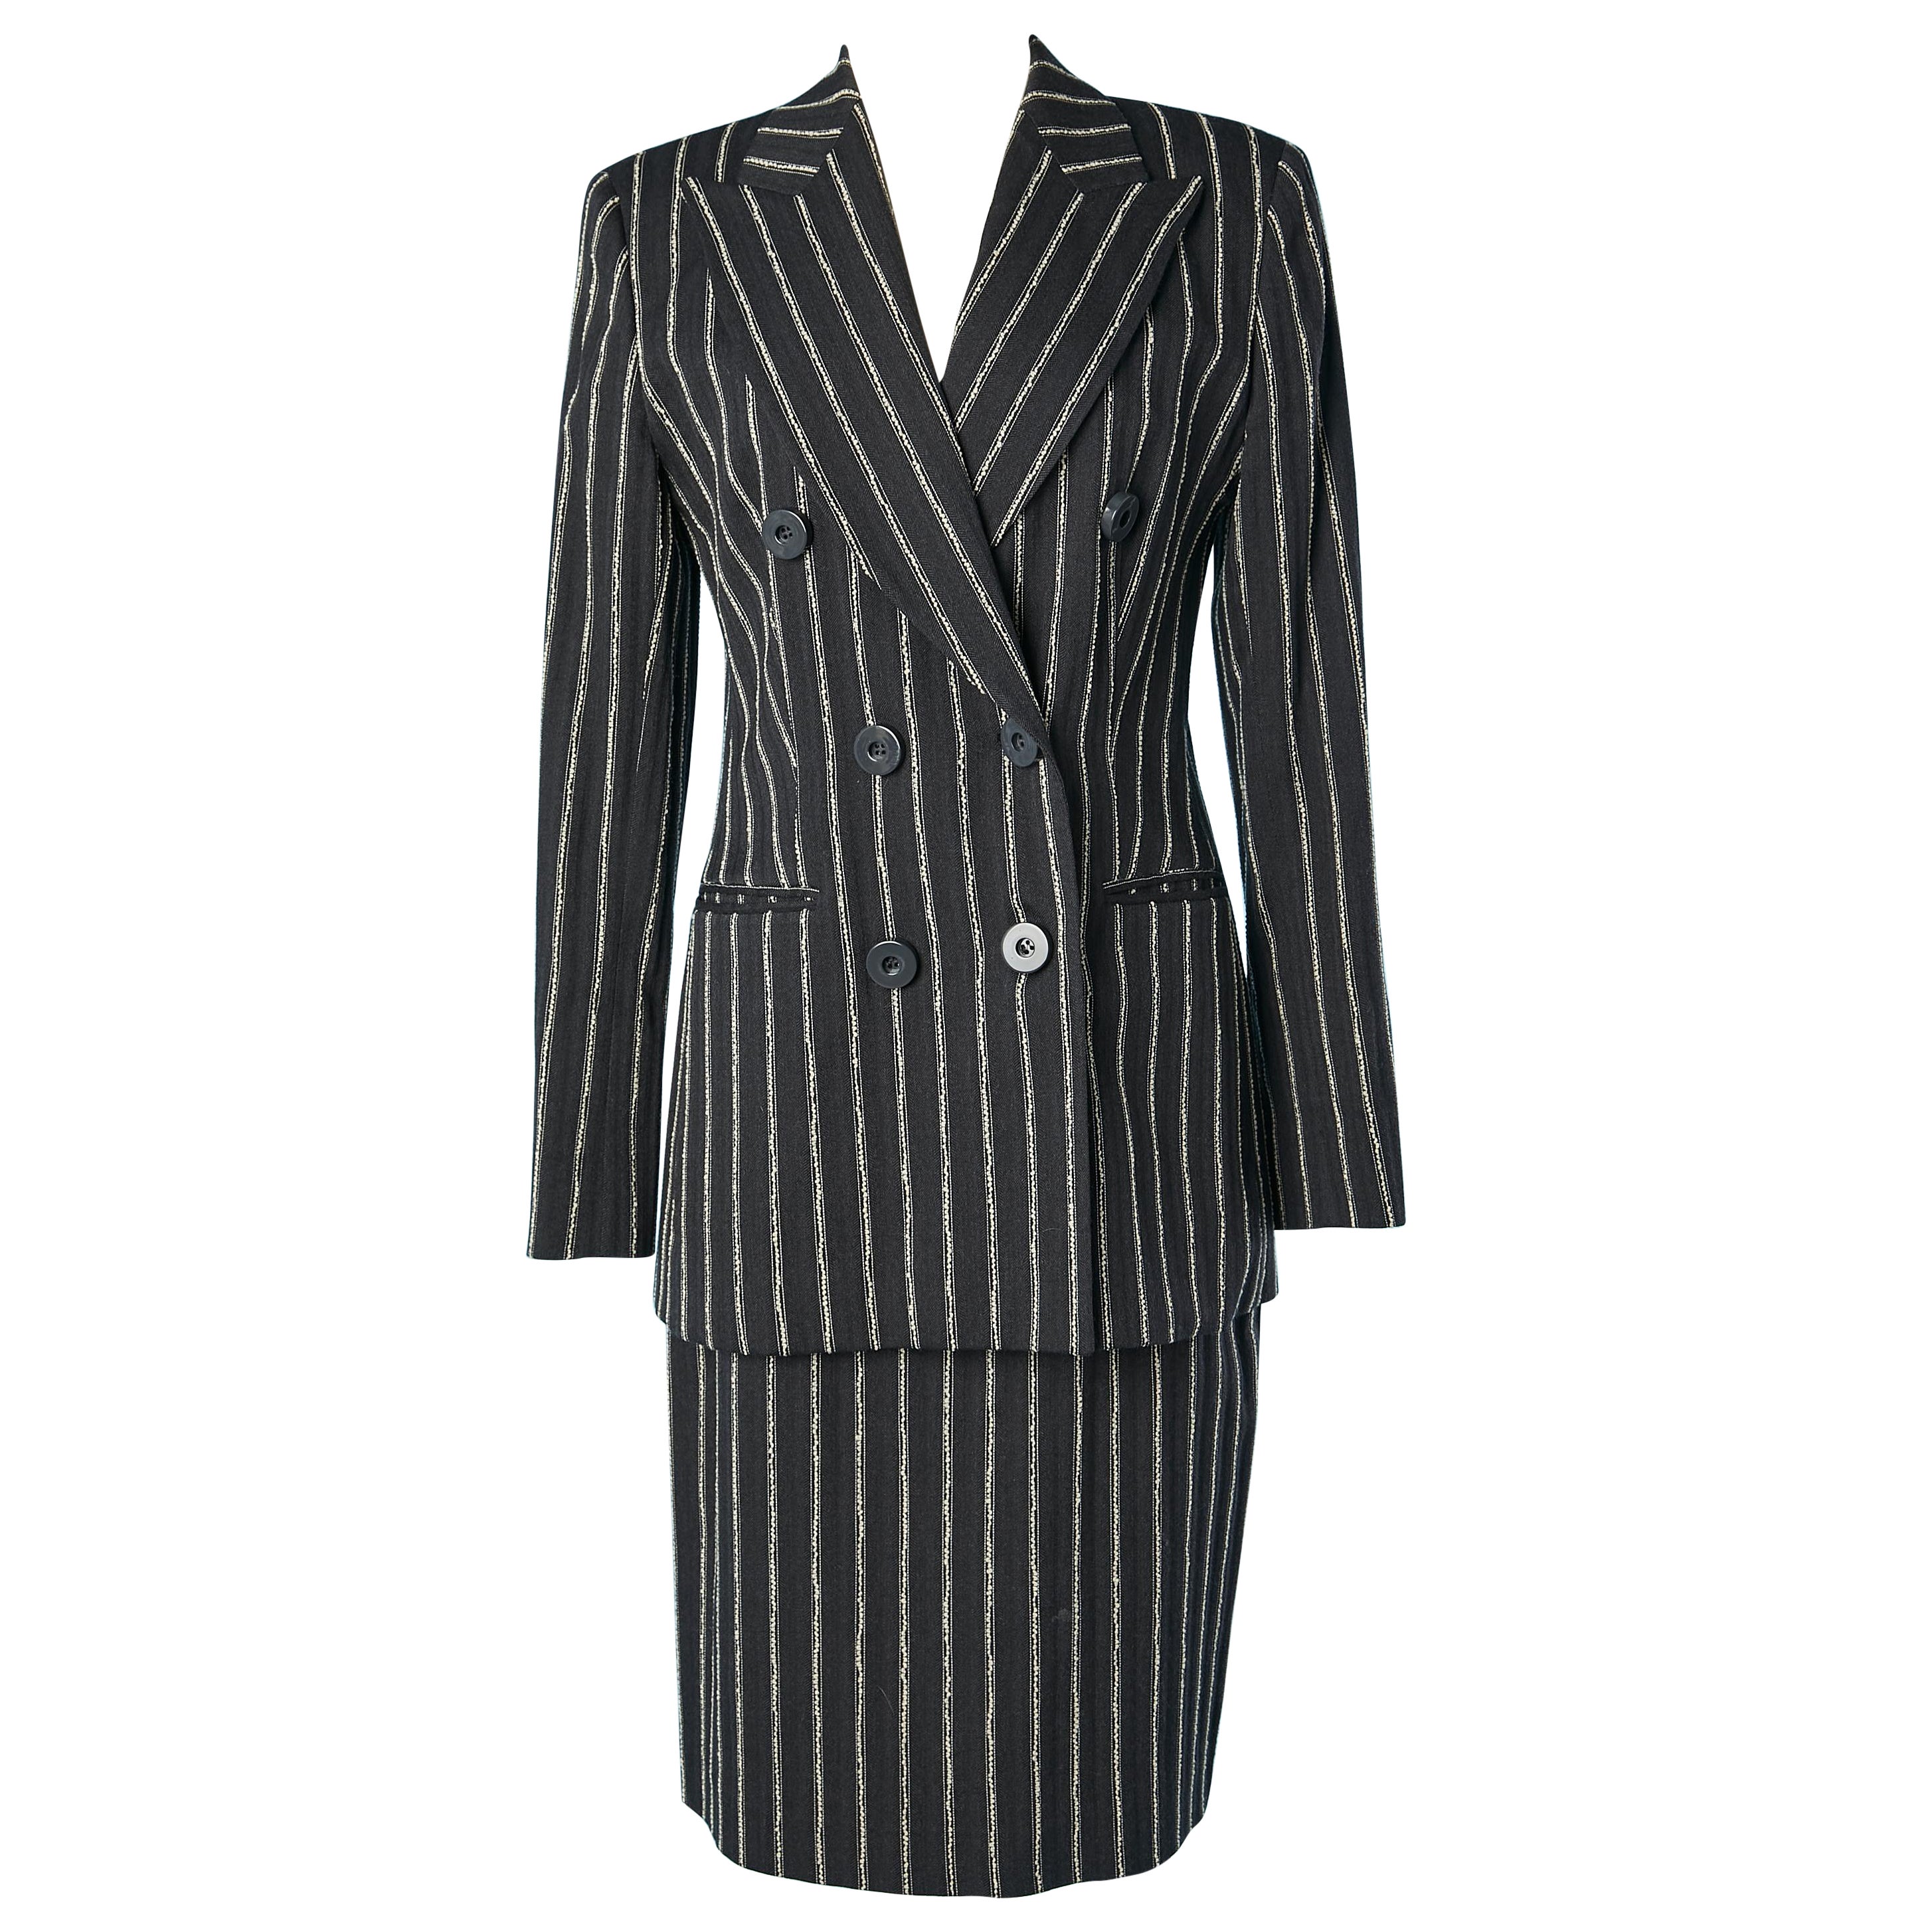 Anthracite striped wool and cotton double-breasted skirt suit Studio Ferré  For Sale